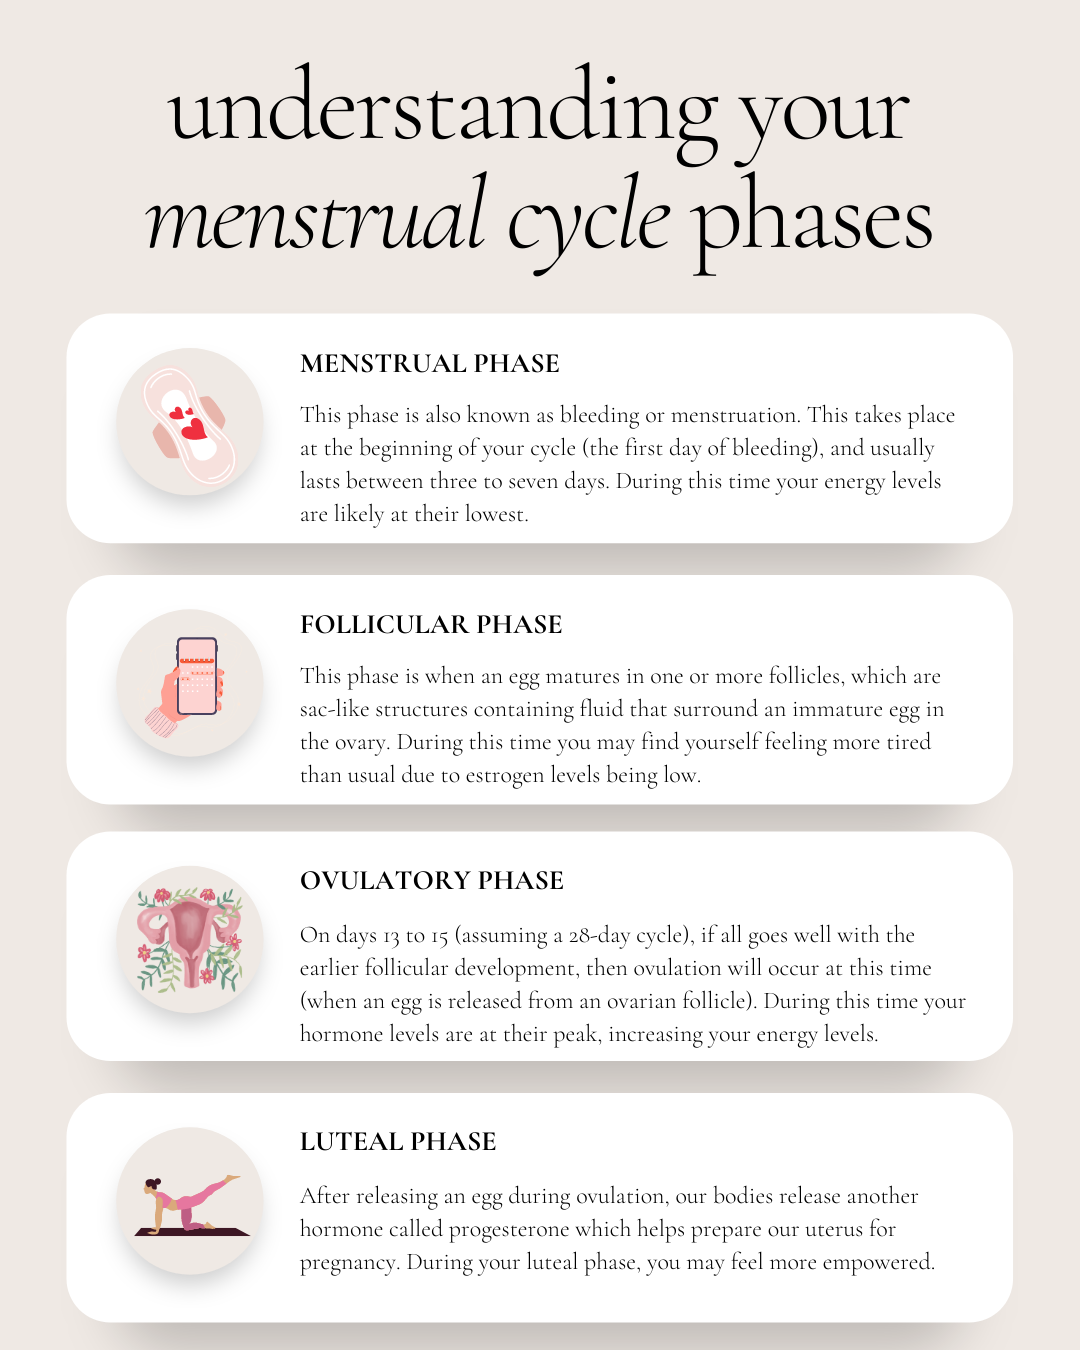 Cycle Syncing Planner & Guide: A Guide to Balanced Living Through Your  Menstrual Phases